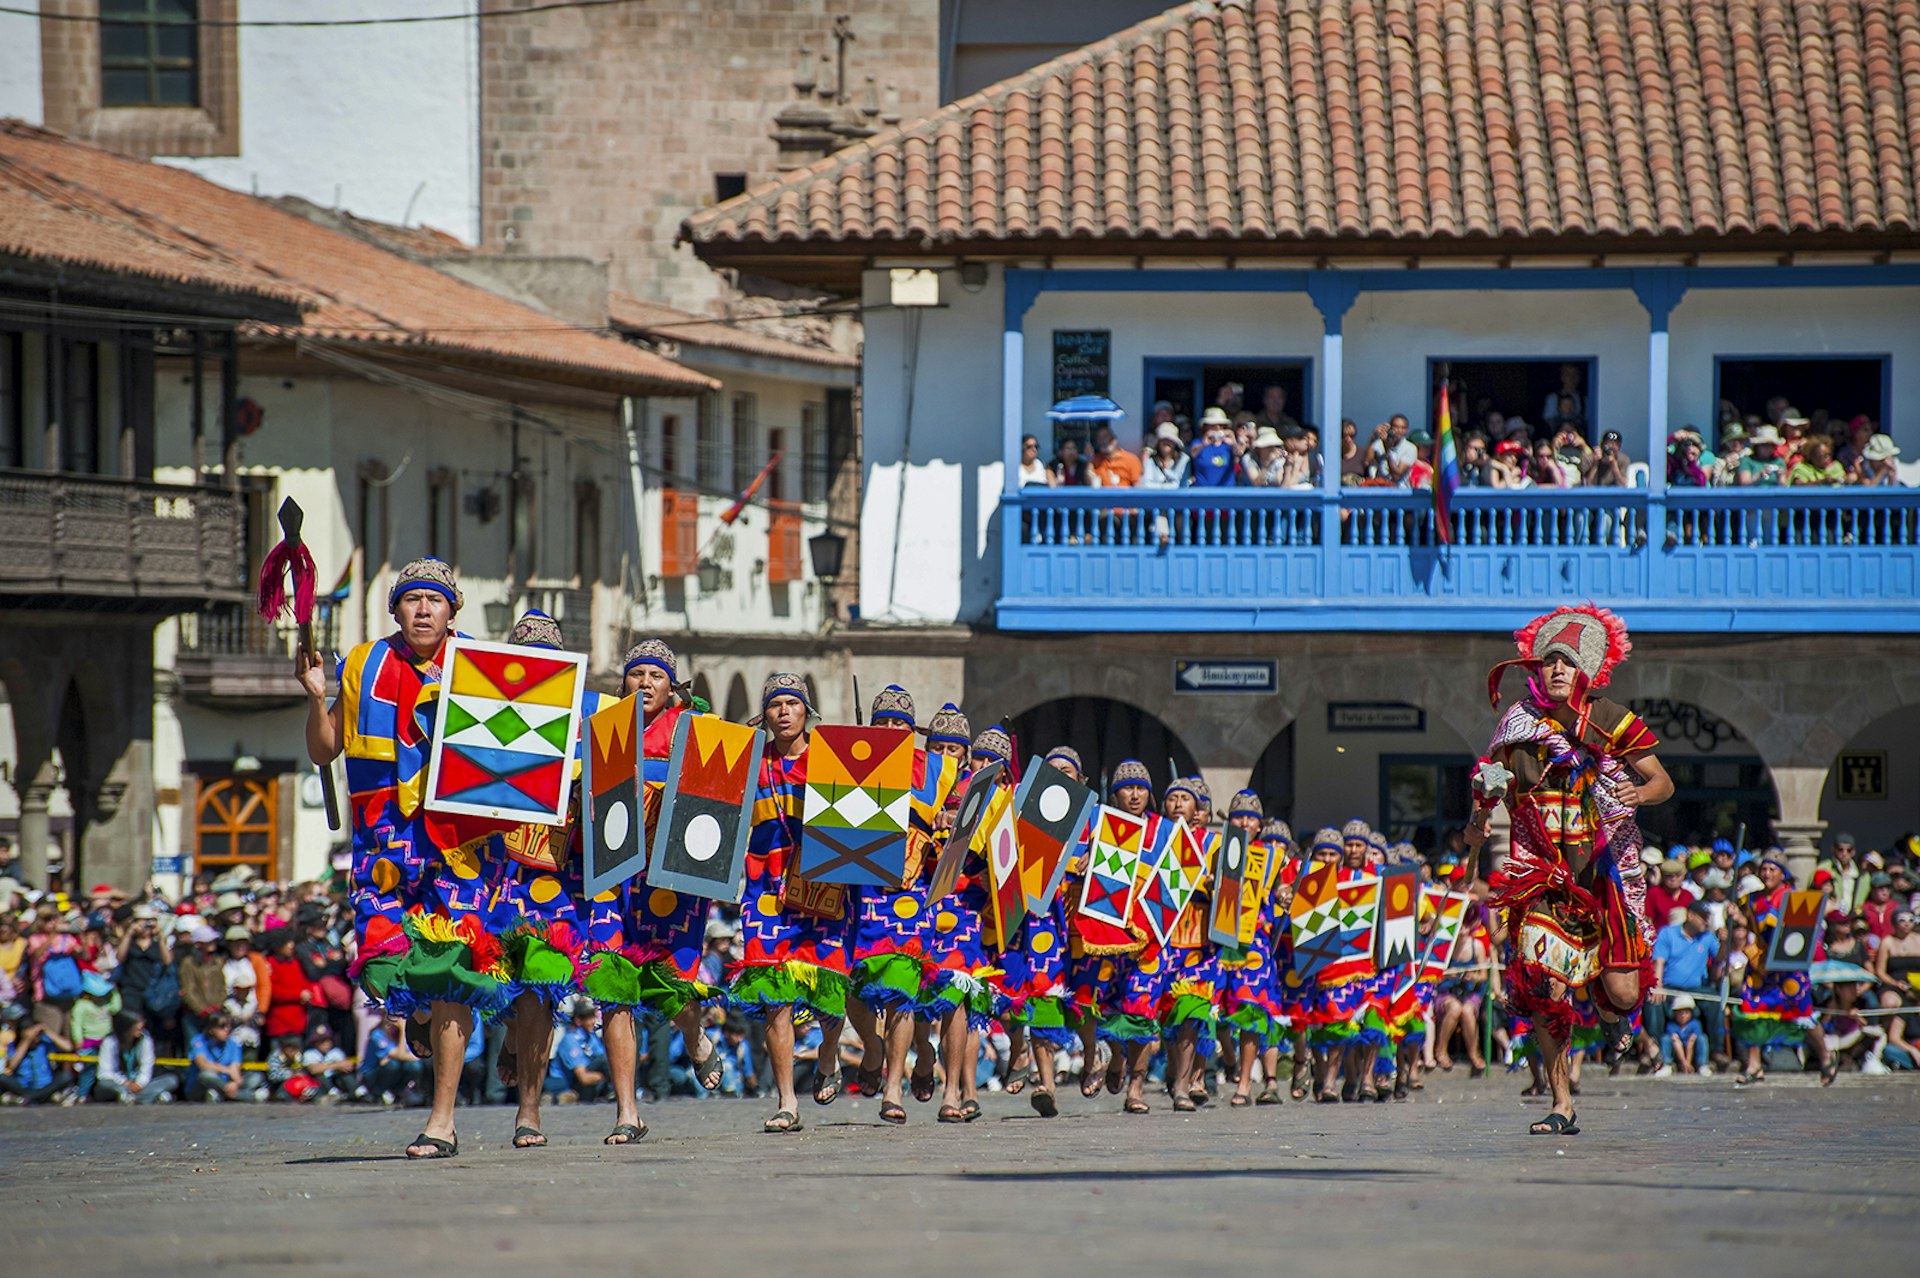 A line of men wearing colorful traditional Inca dress holding shields with geometric patterns walk through historic Cuzco, Peru for the solstice festival Inti Raymi.